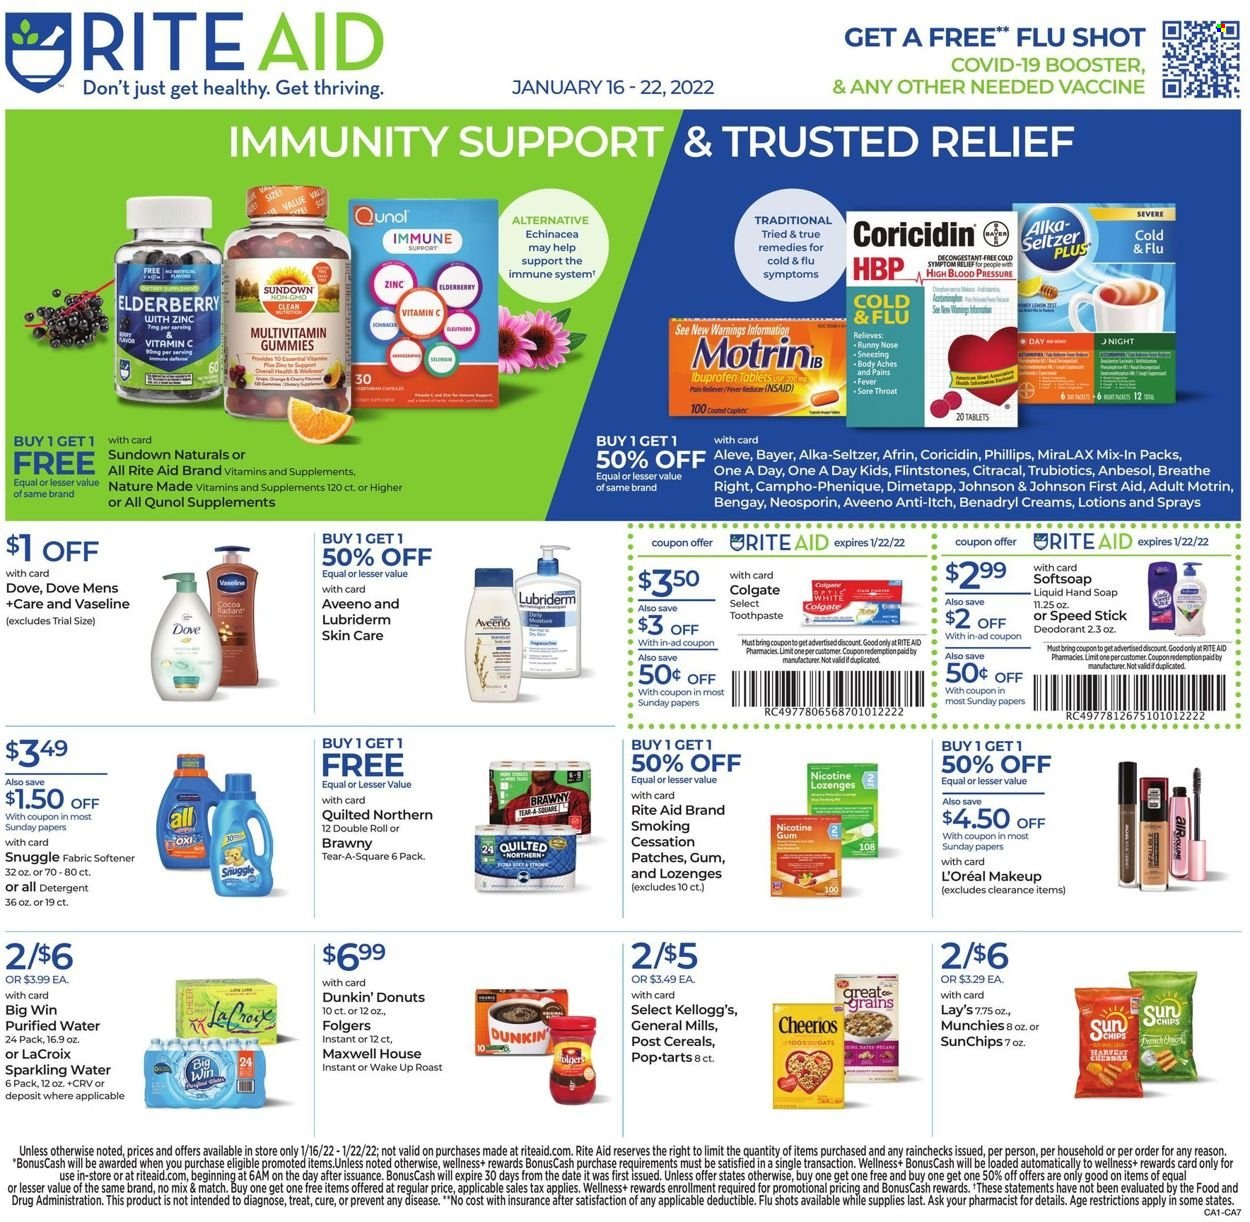 thumbnail - RITE AID Flyer - 01/16/2022 - 01/22/2022 - Sales products - donut, Kellogg's, Pop-Tarts, Lay’s, cereals, Cheerios, sparkling water, purified water, Maxwell House, Folgers, Dunkin' Donuts, Johnson's, Aveeno, Dove, Quilted Northern, detergent, Snuggle, fabric softener, Softsoap, hand soap, Vaseline, soap, Colgate, toothpaste, L’Oréal, Brite, Lubriderm, anti-perspirant, Speed Stick, deodorant, makeup, Afrin, Aleve, Coricidin, Dimetapp, Cold & Flu, MiraLAX, multivitamin, Nature Made, Neosporin, Qunol, Sundown Naturals, vitamin c, Ibuprofen, Bengay, Alka-seltzer, Bayer, Motrin. Page 1.